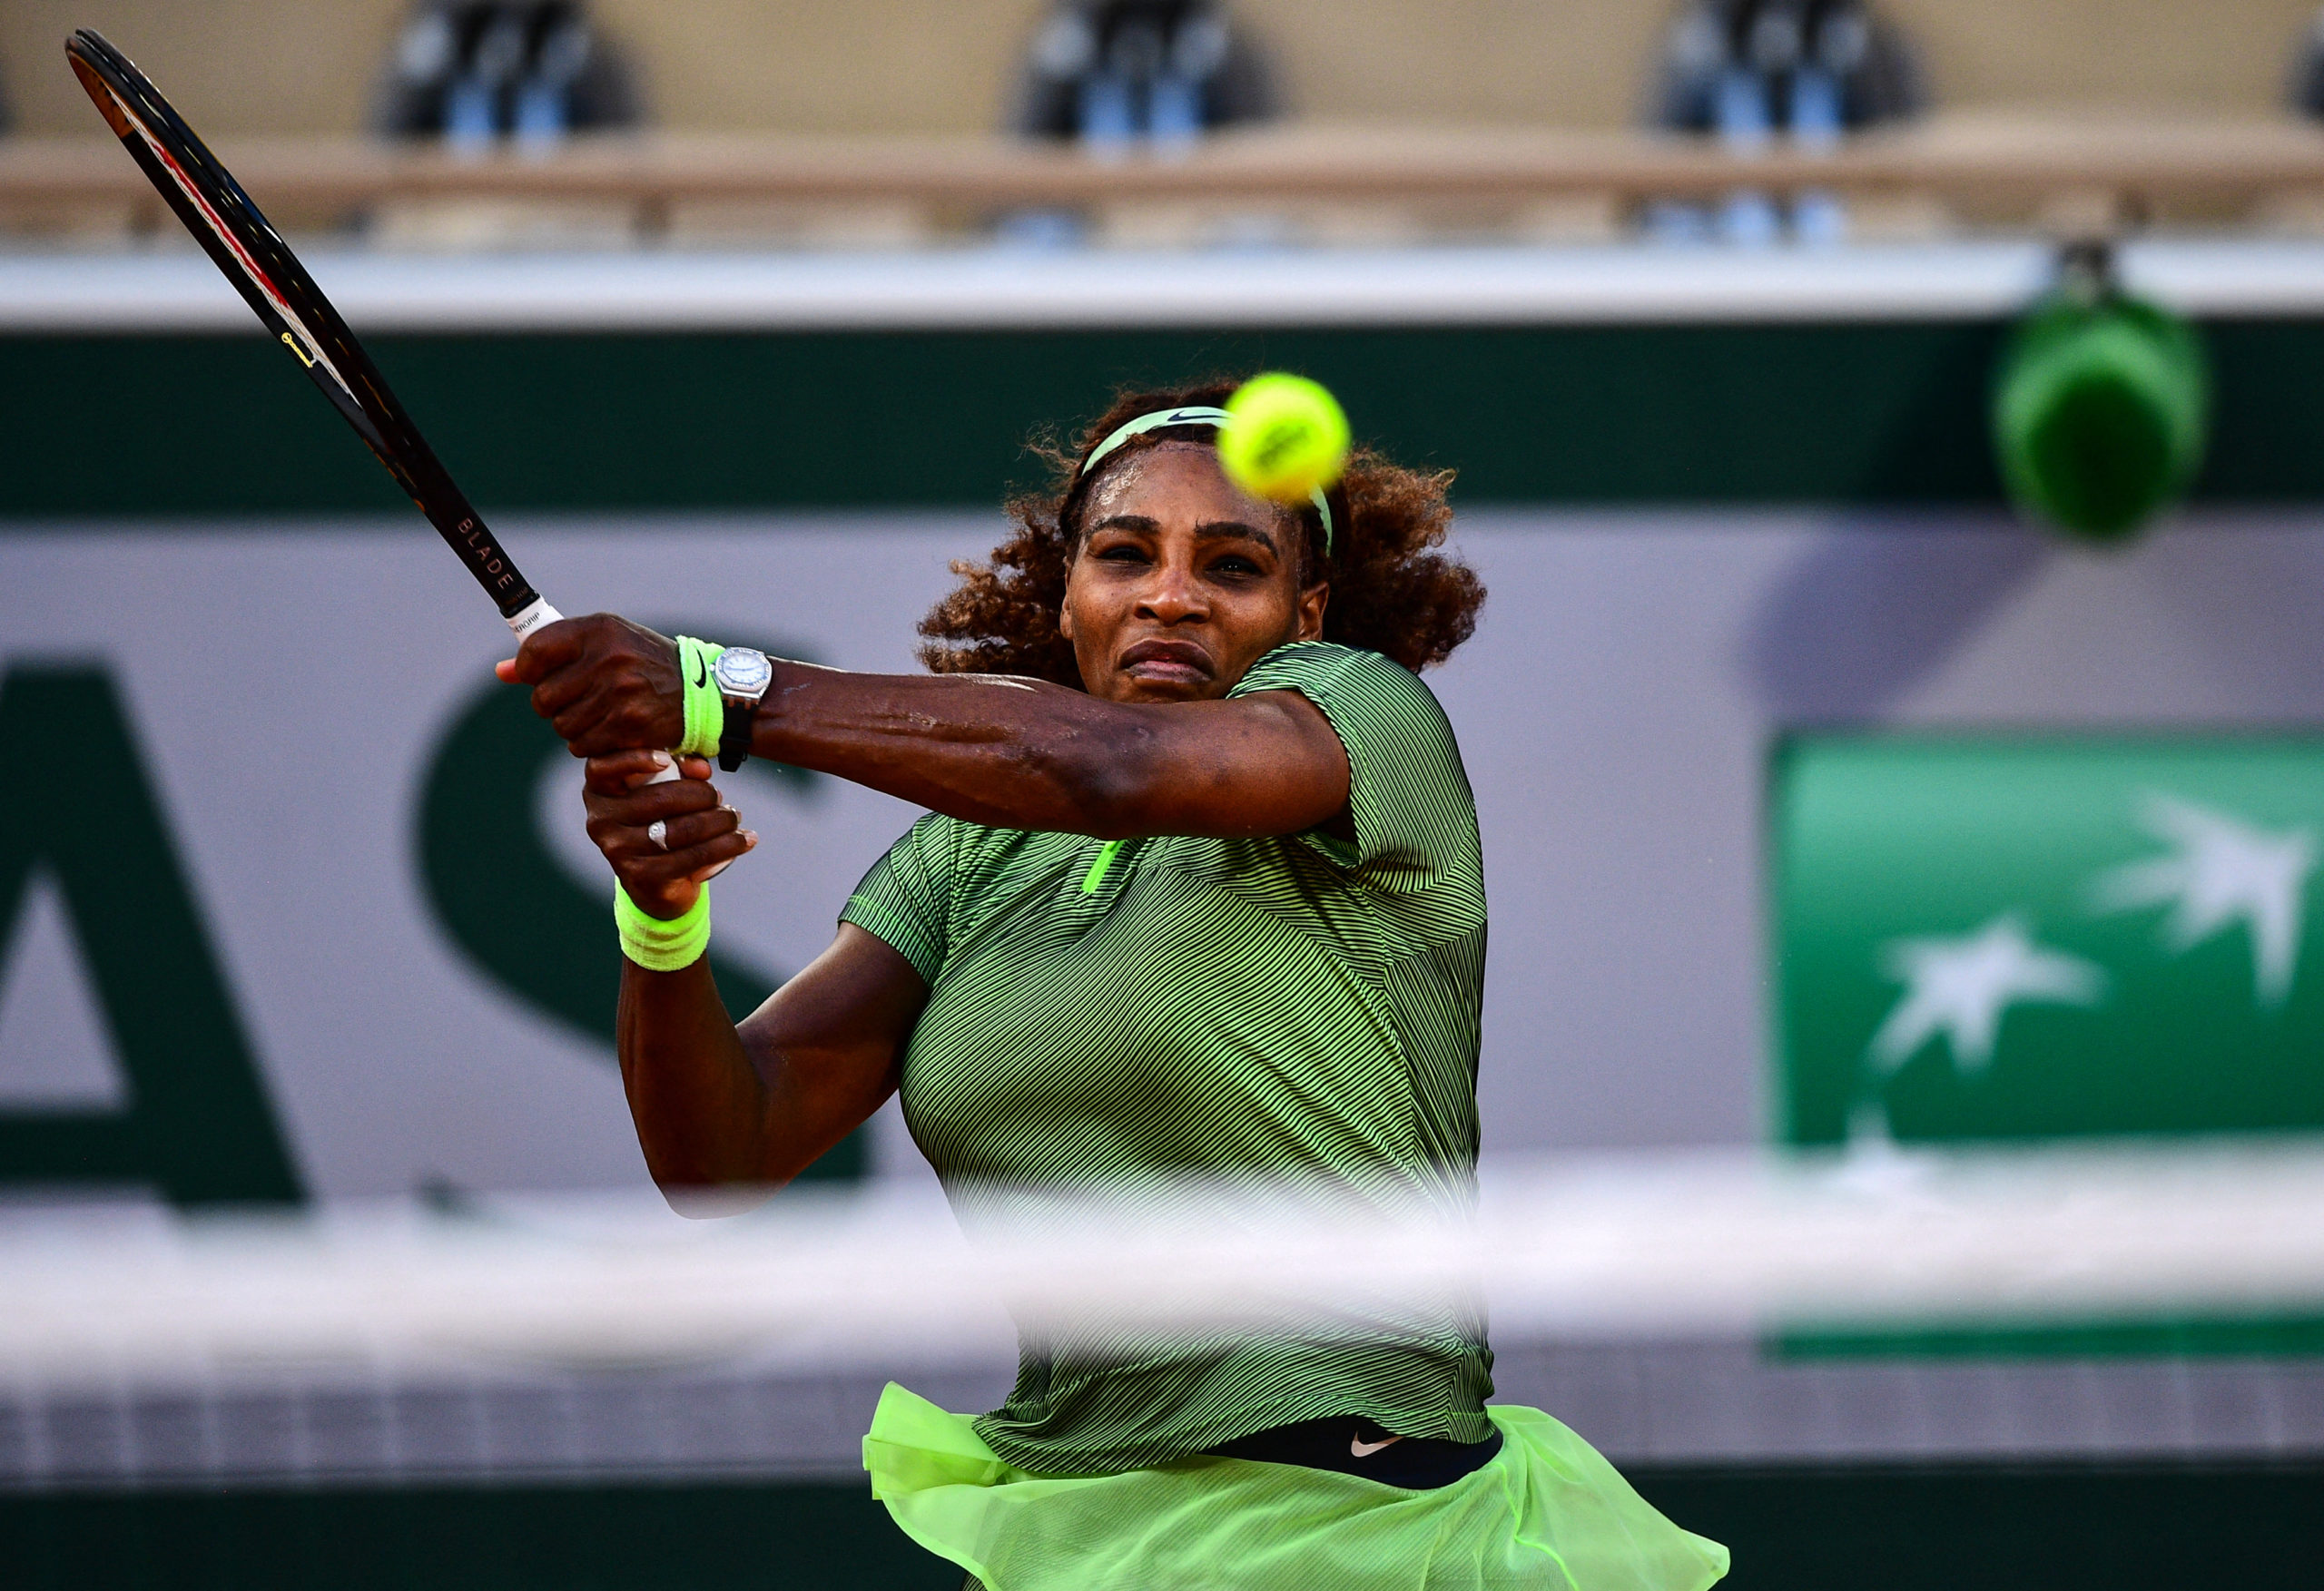 Serena Williams of the US returns the ball to Romania's Mihaela Buzarnescu during their women's singles second round tennis match on Day 4 of The Roland Garros 2021 French Open tennis tournament in Paris on June 2, 2021. (Photo by Martin BUREAU / AFP)